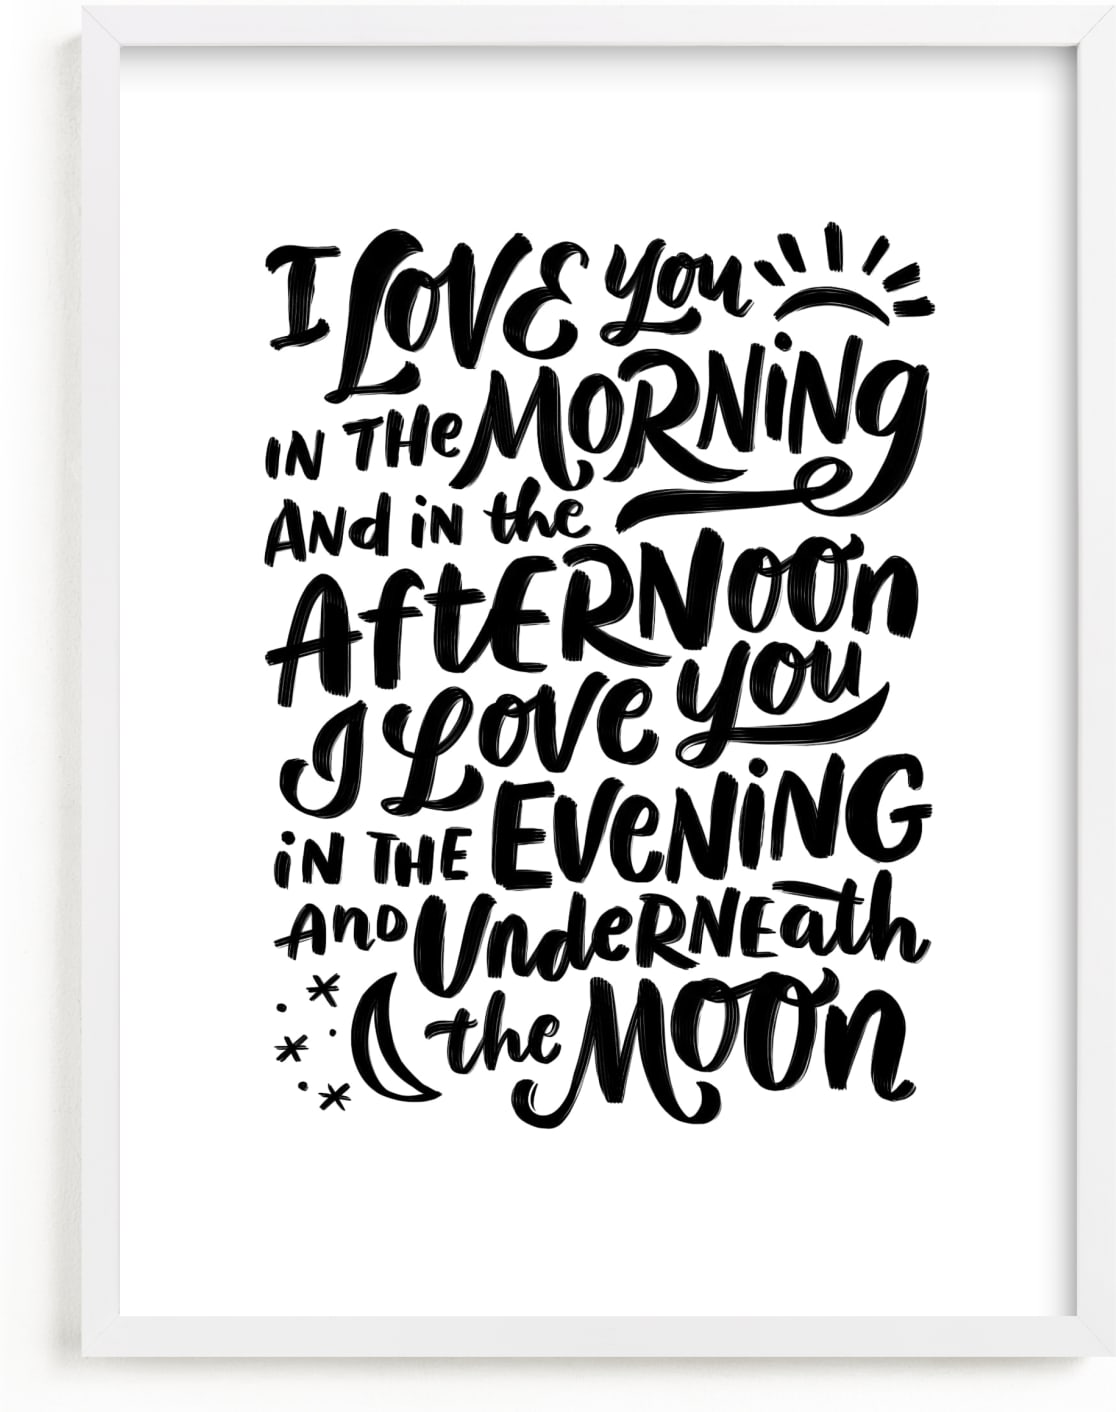 This is a black and white nursery wall art by Laura Bolter called I love you in the morning.